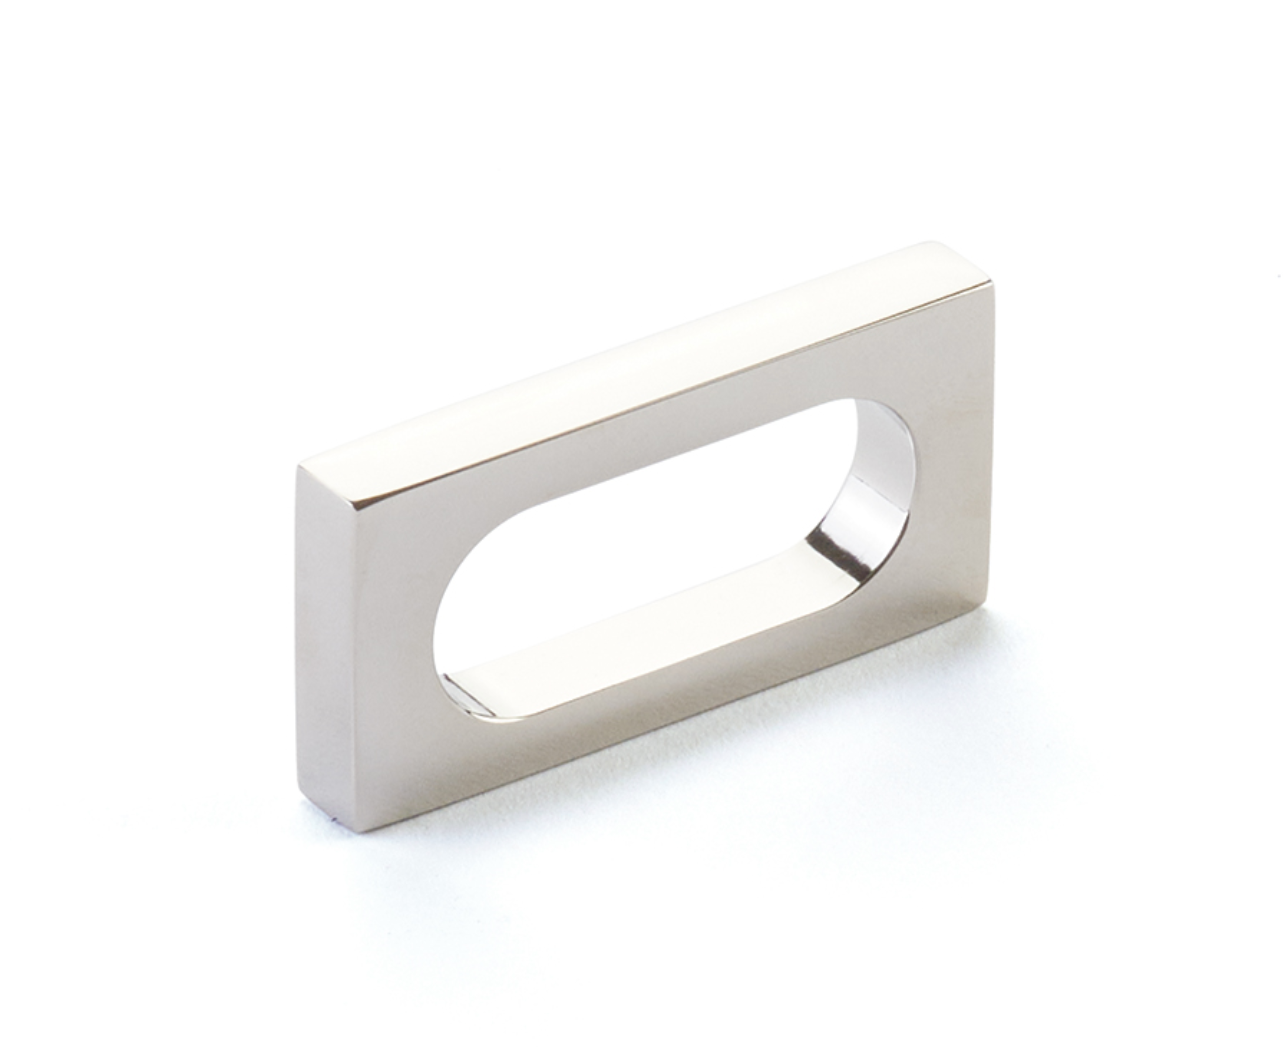 Polished Nickel "Loop" Square Drawer Pulls and Cabinet Knobs